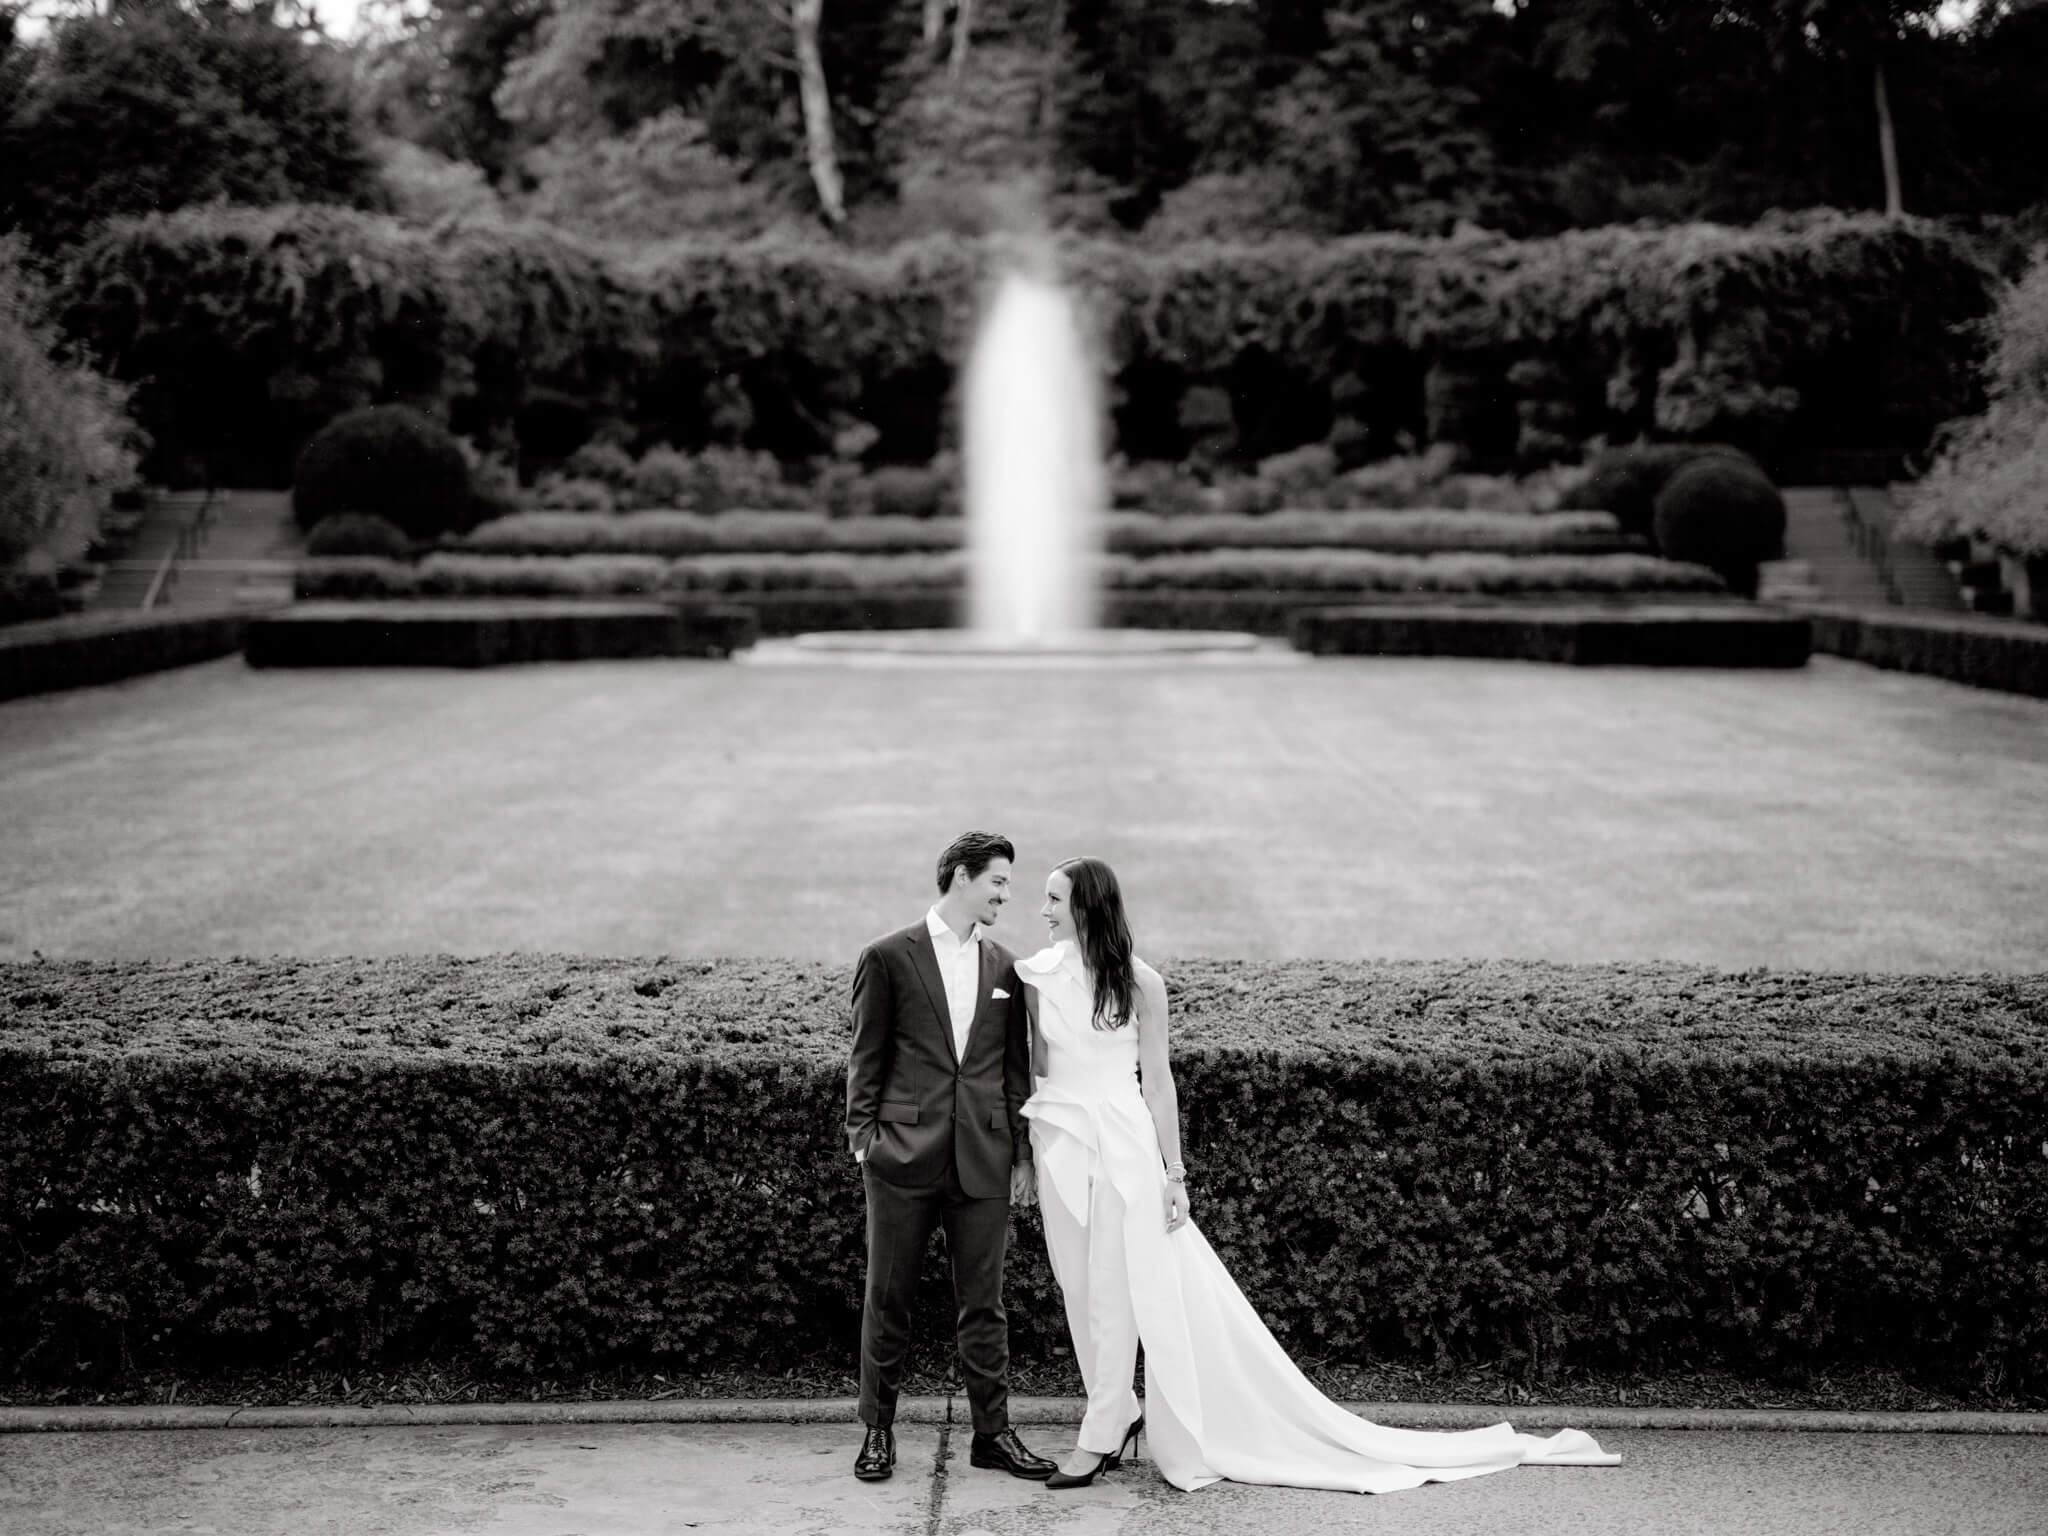 The bride and groom are staring at each other's eyes, with the glorious fountain at the Conservatory Garden in the background. Image by Jenny Fu Studio